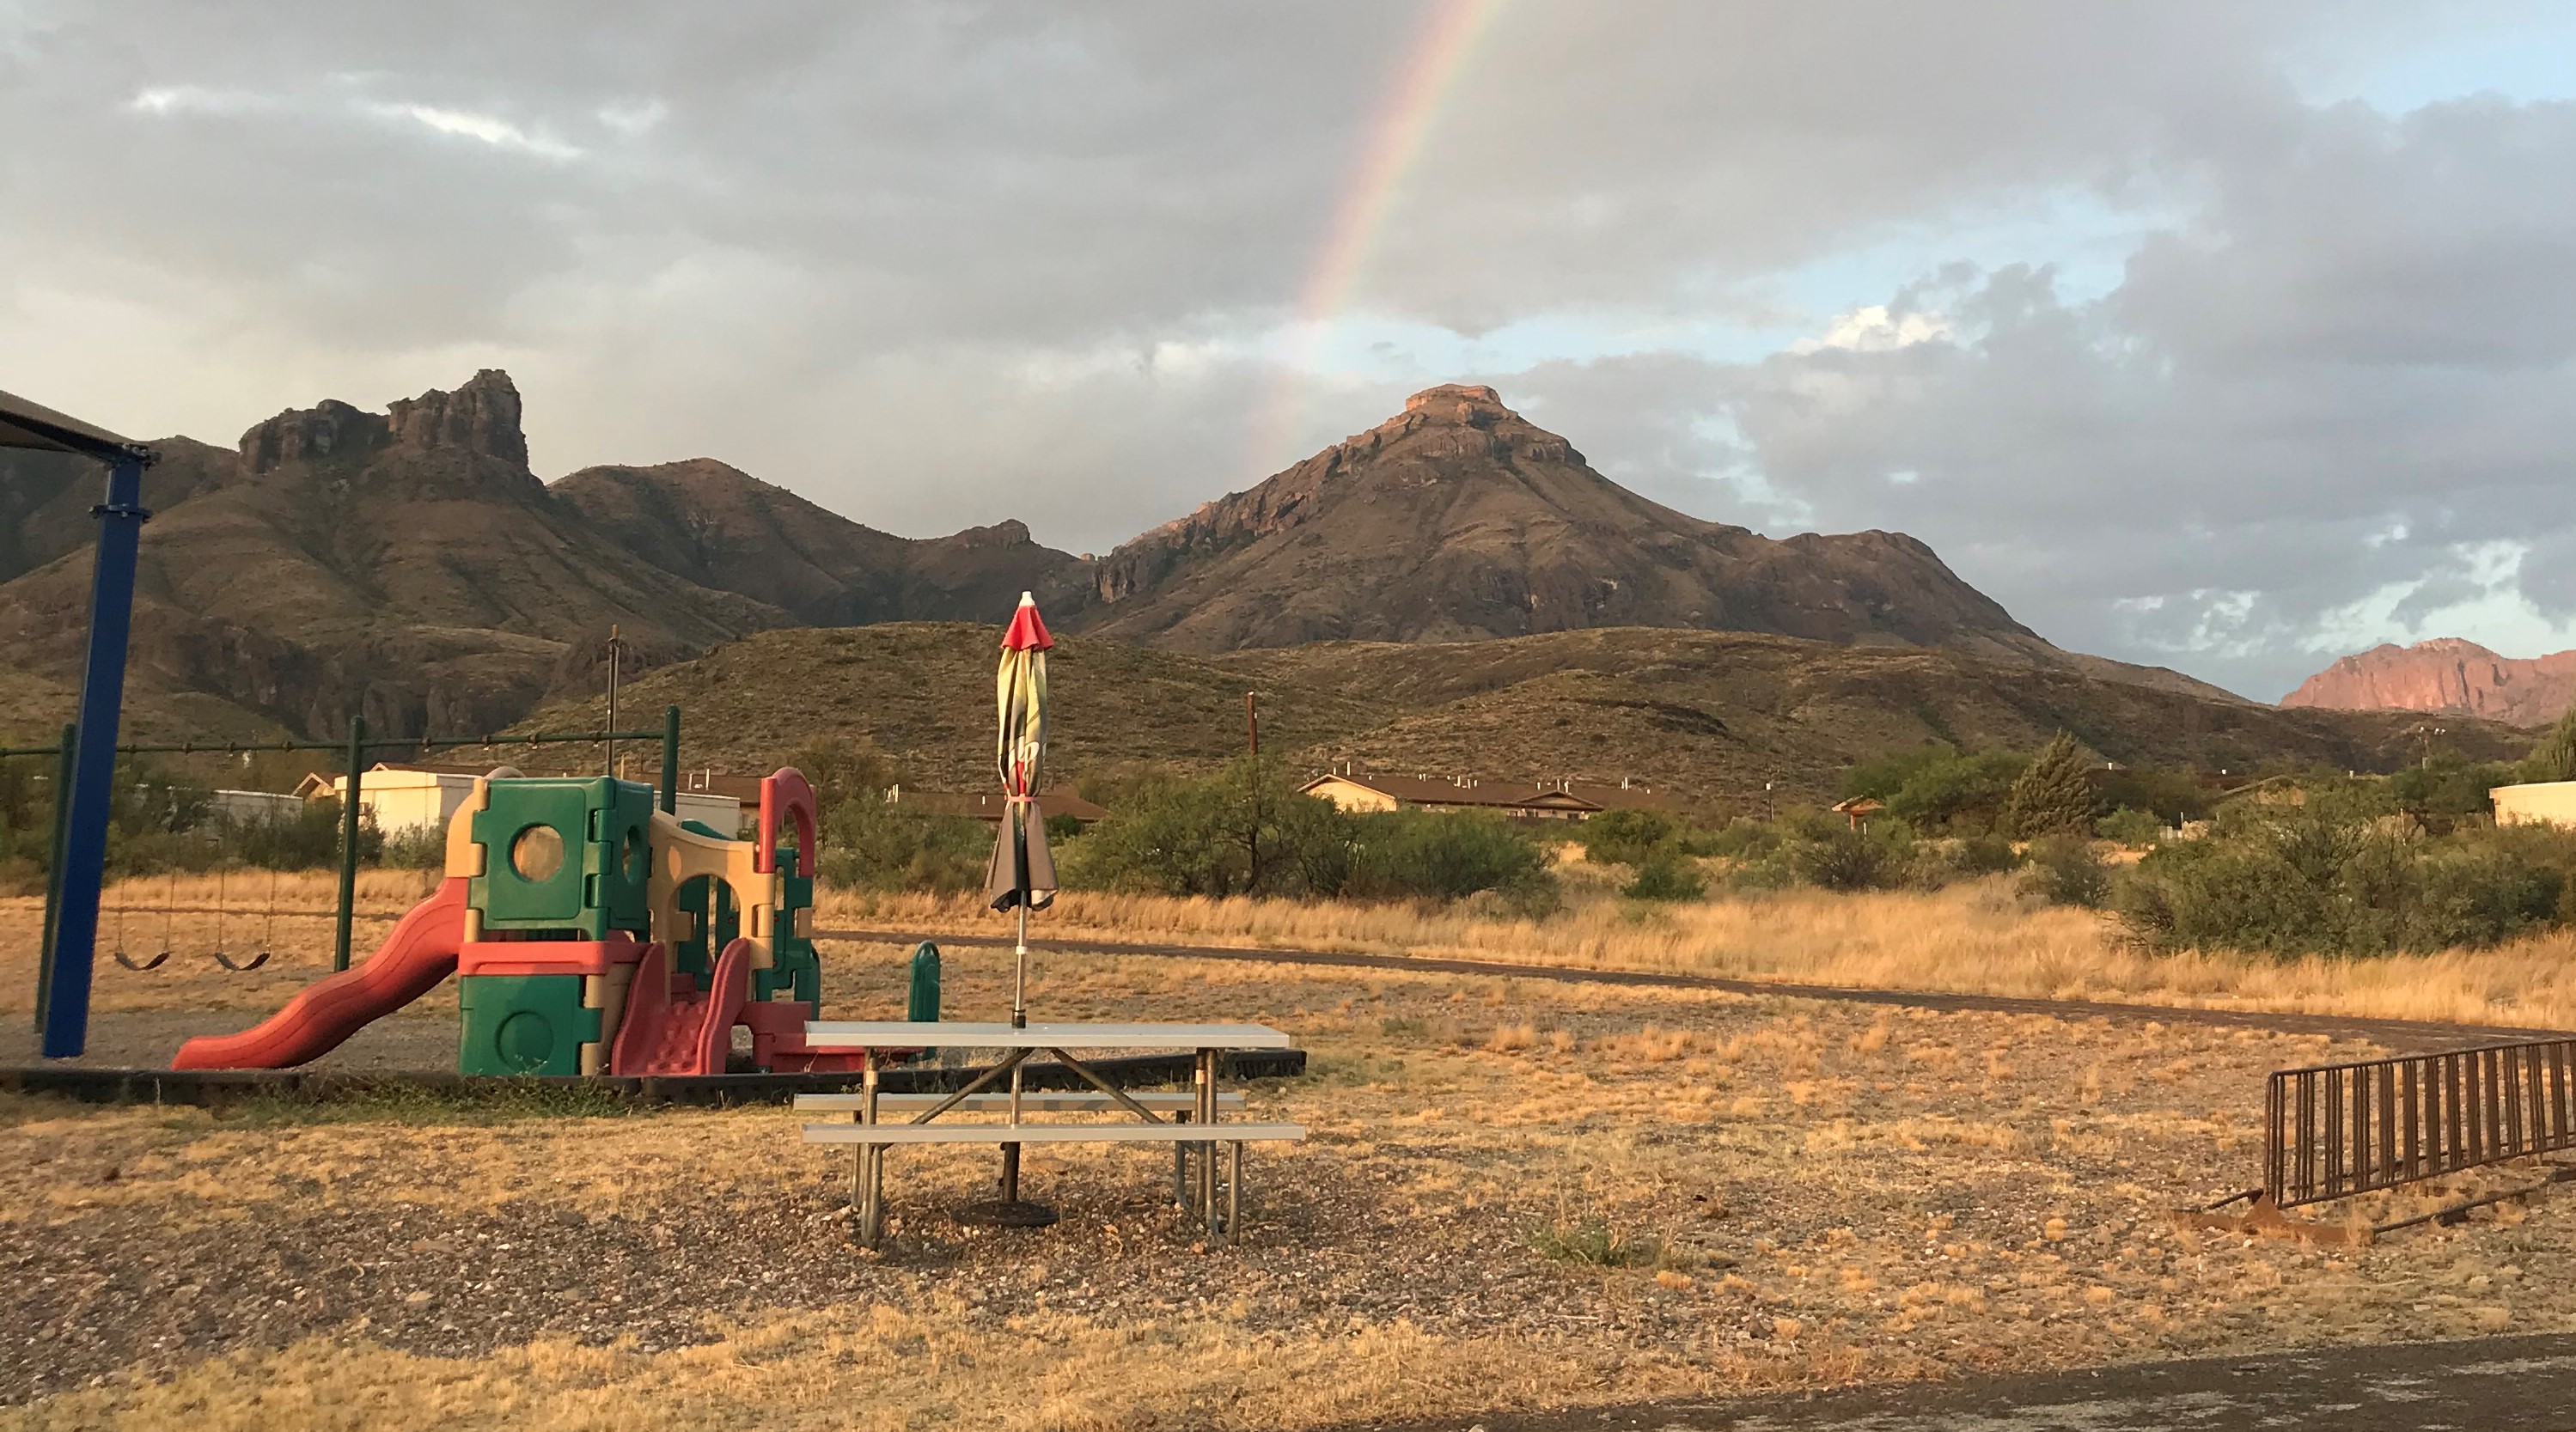 Playground with a rainbow in the background